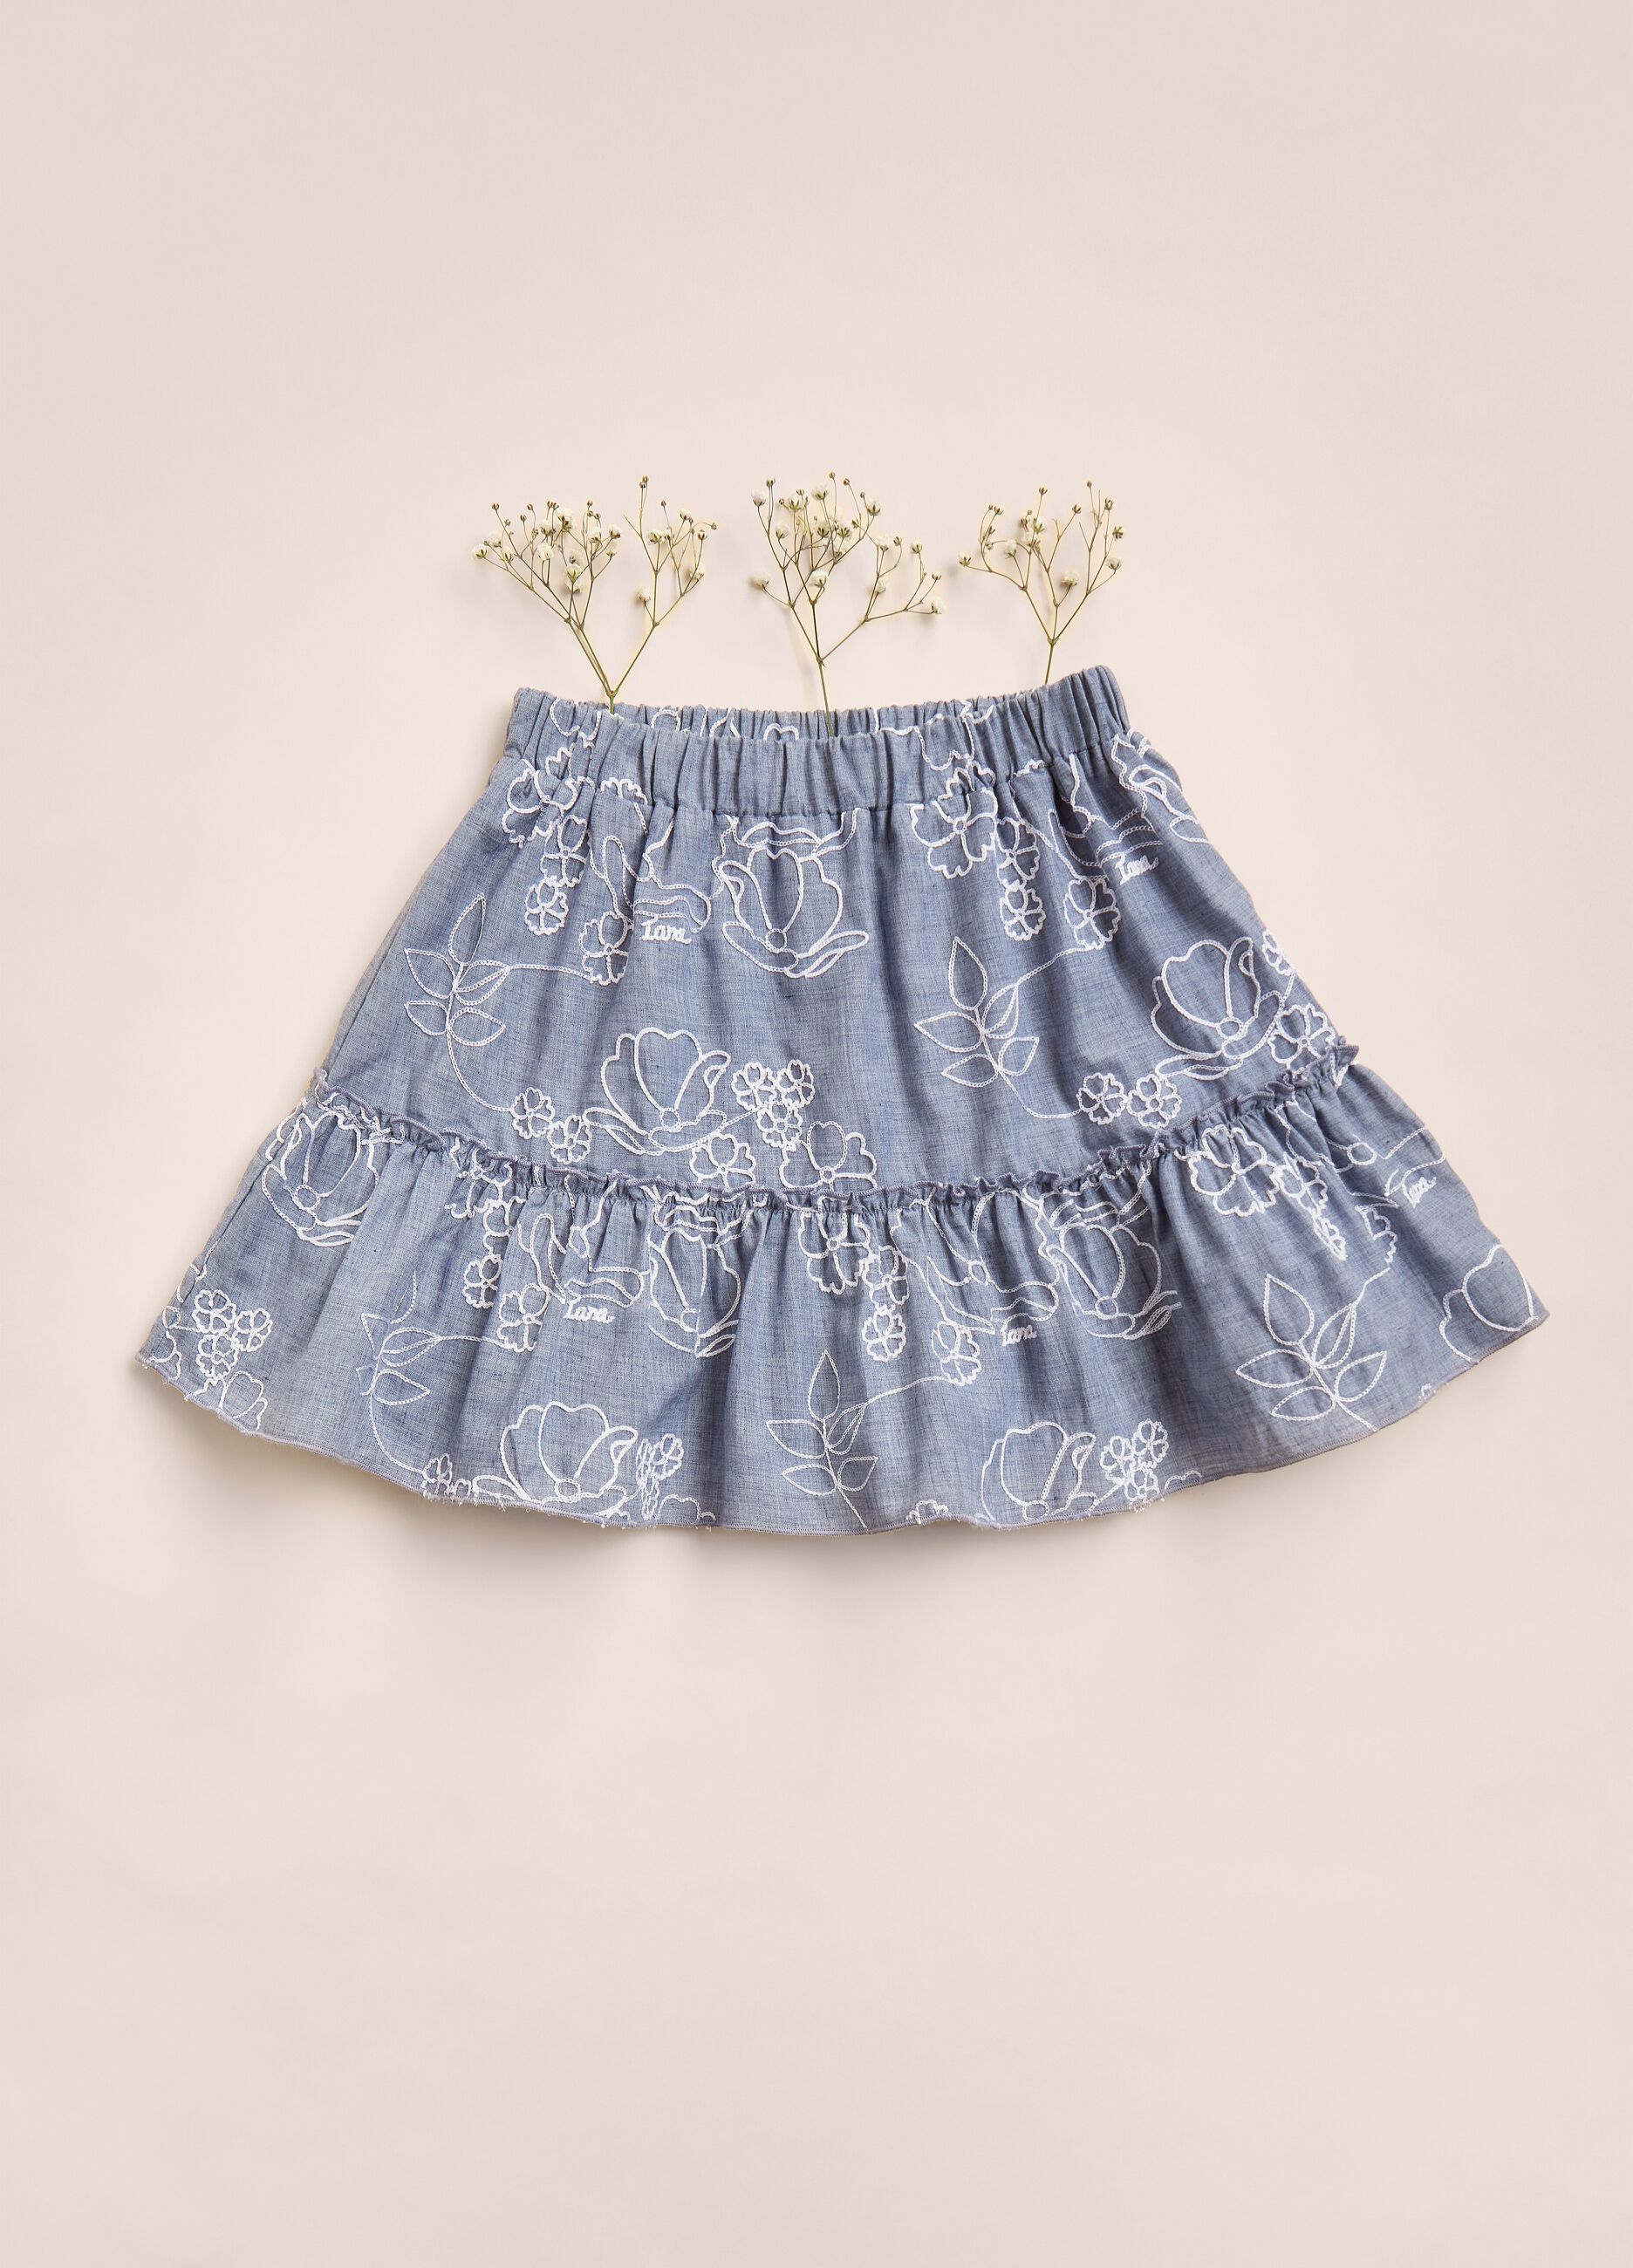 IANA cotton blend skirt with floral embroidery